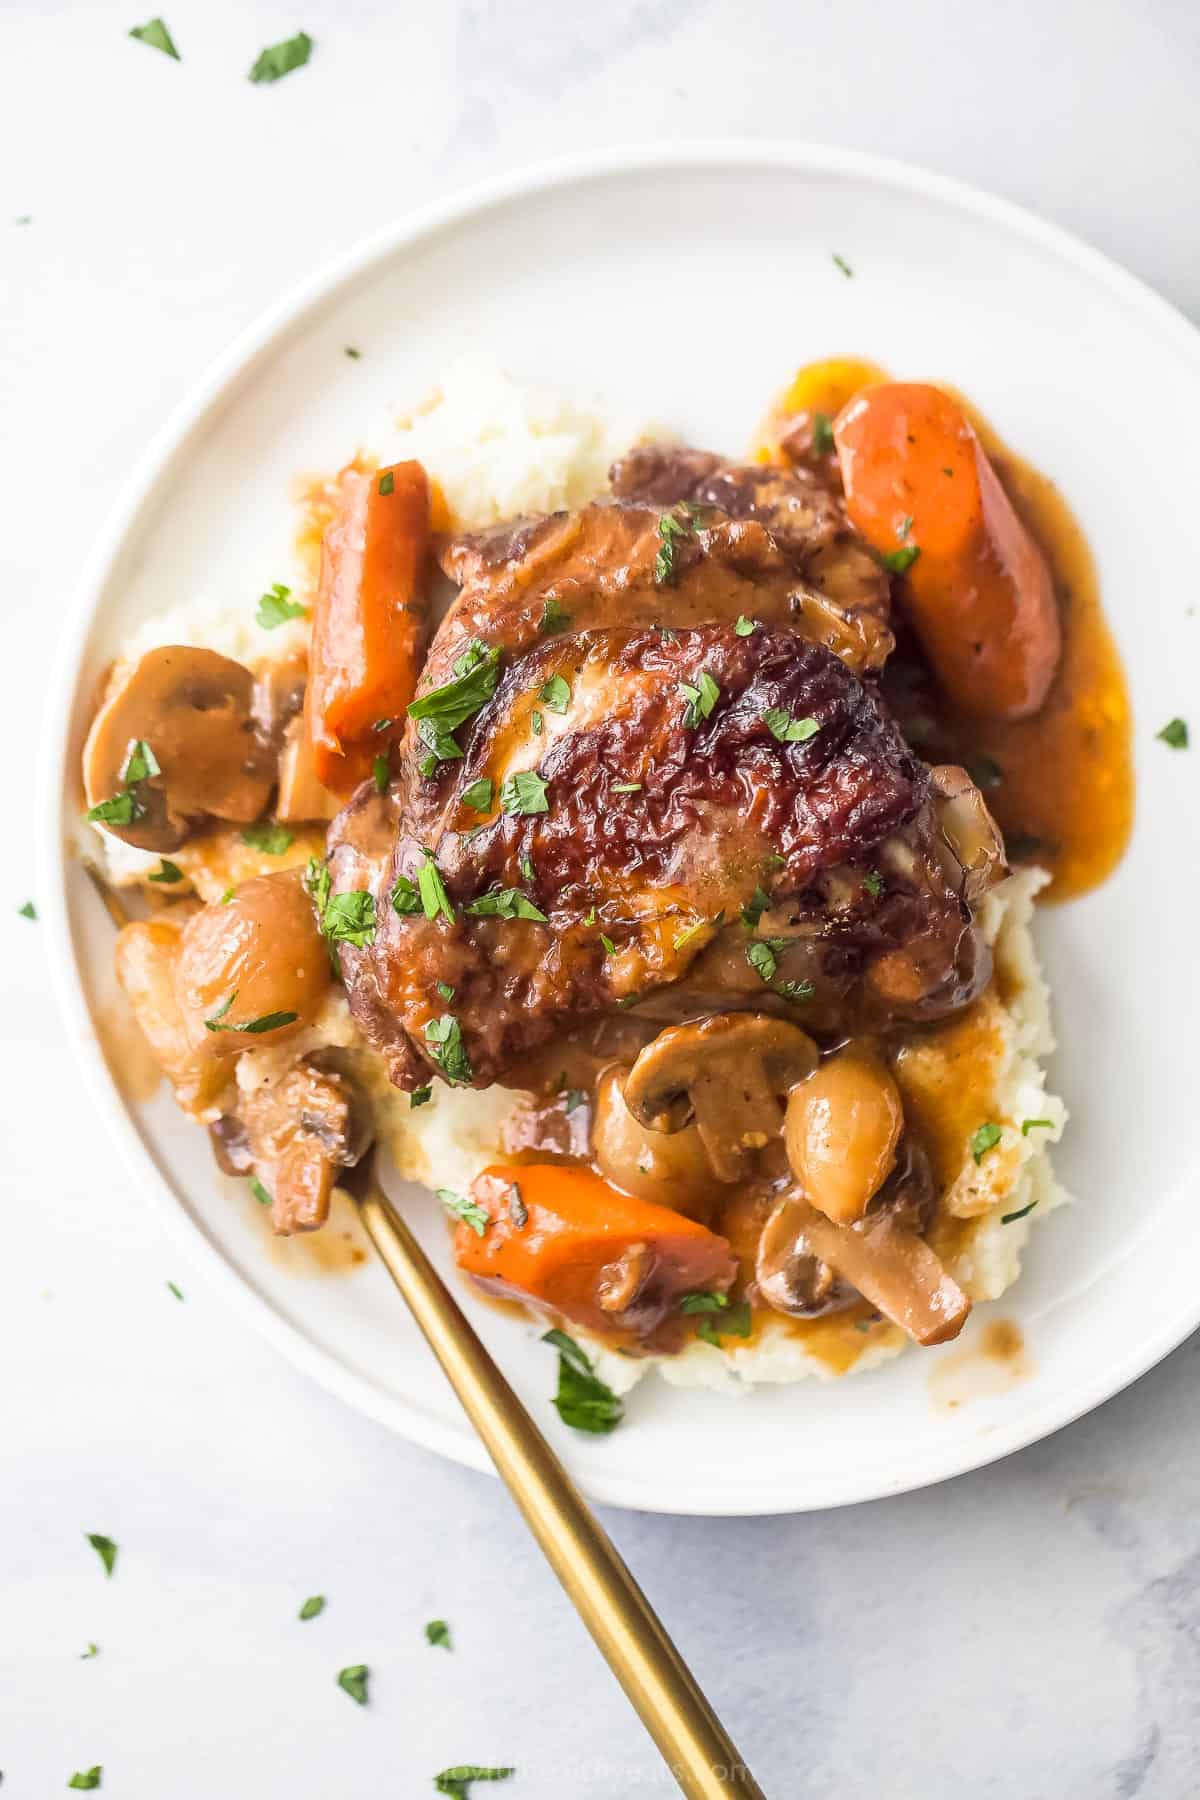 A helping of coq au vin over a serving of mashed potatoes on a plate